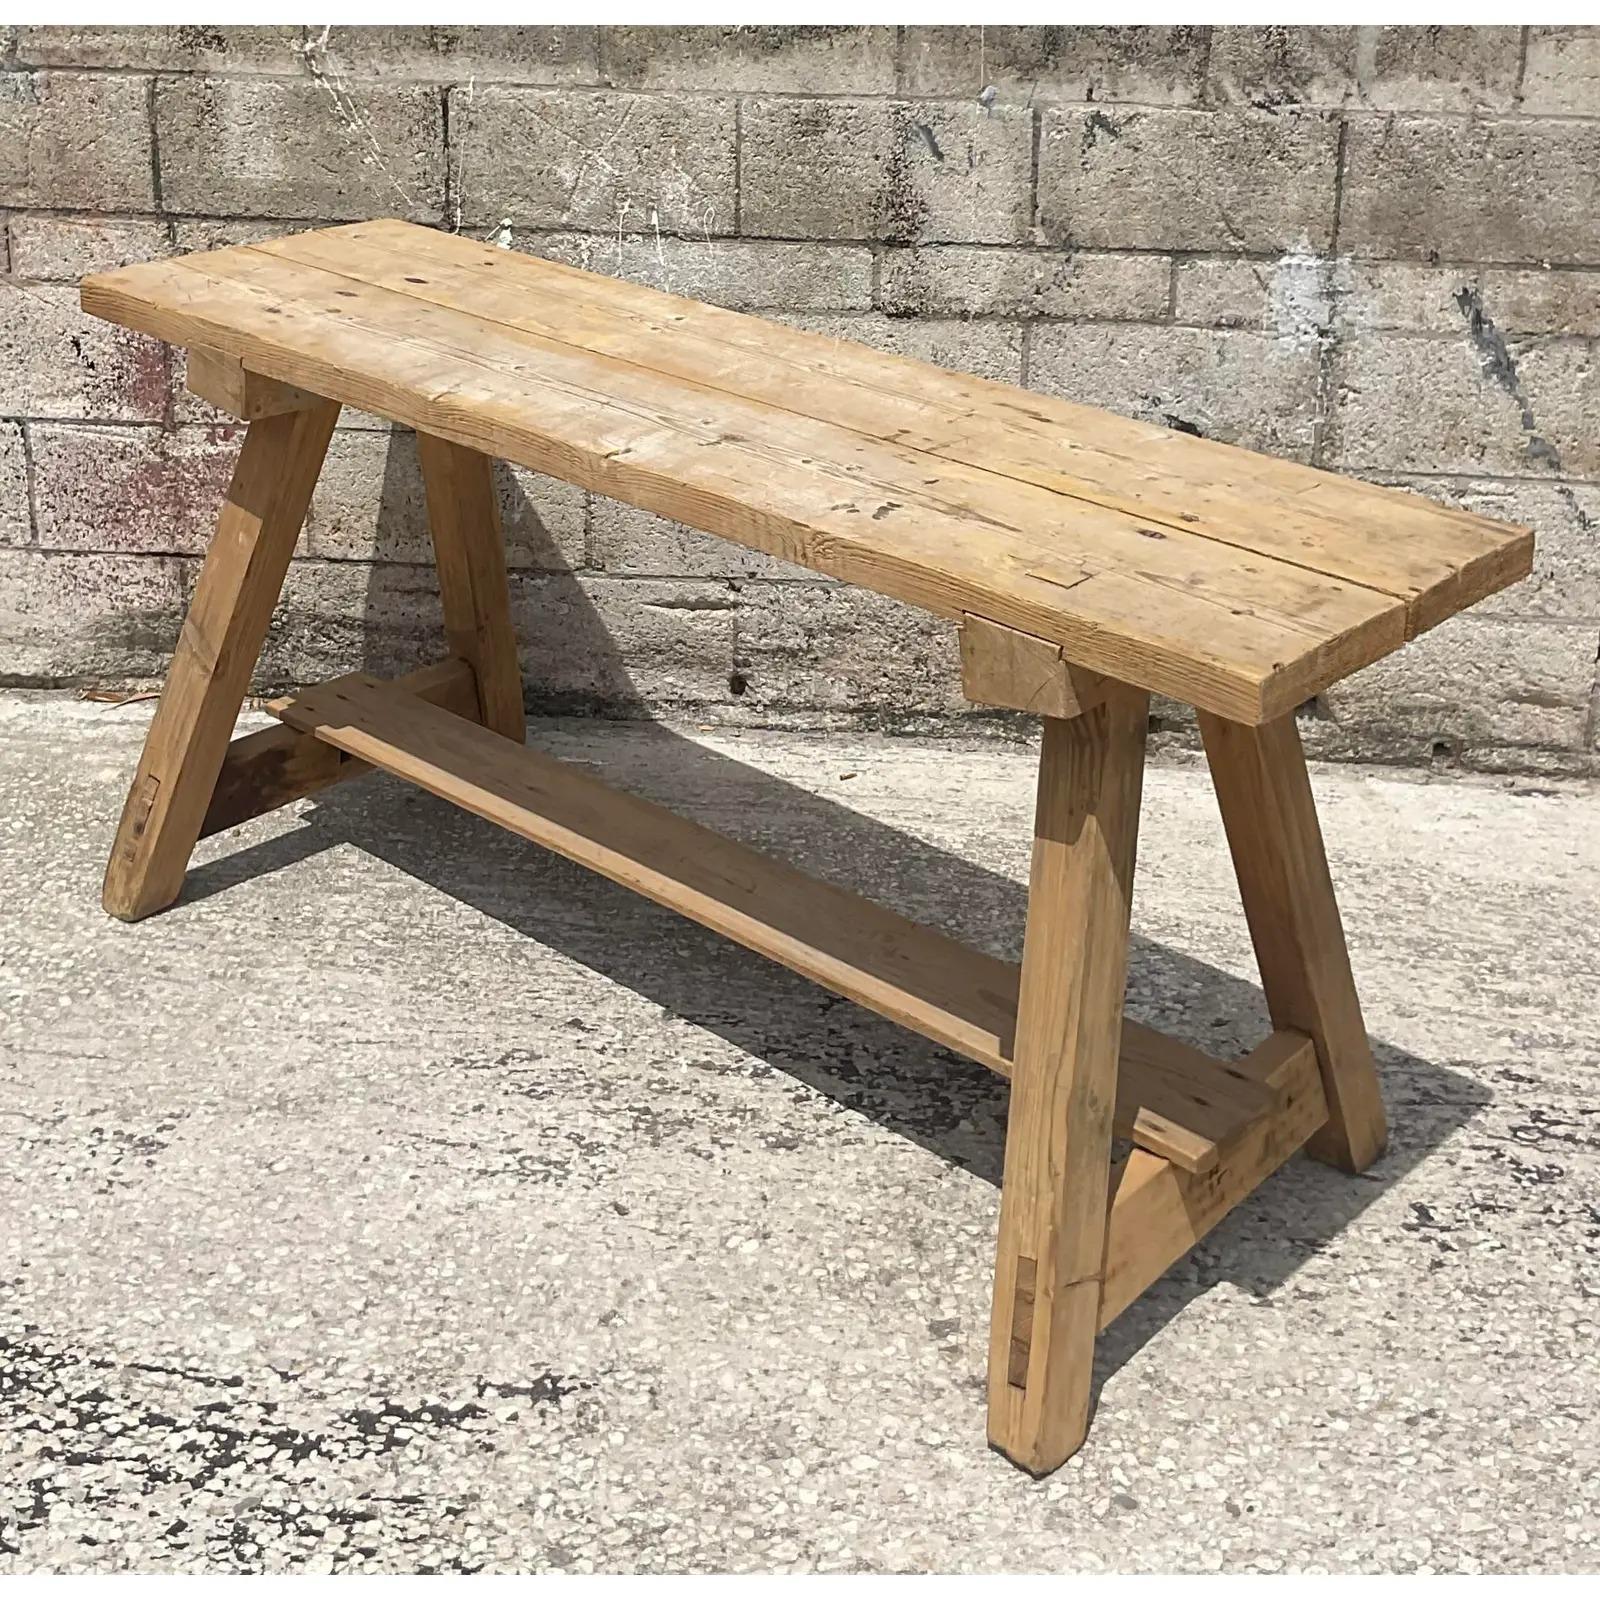 Fantastic vintage MCM splayed leg console table. Constructed using Antique French planks and joined using ancient Japanese techniques. Chic in its simplicity. Acquired from a Palm Beach estate.